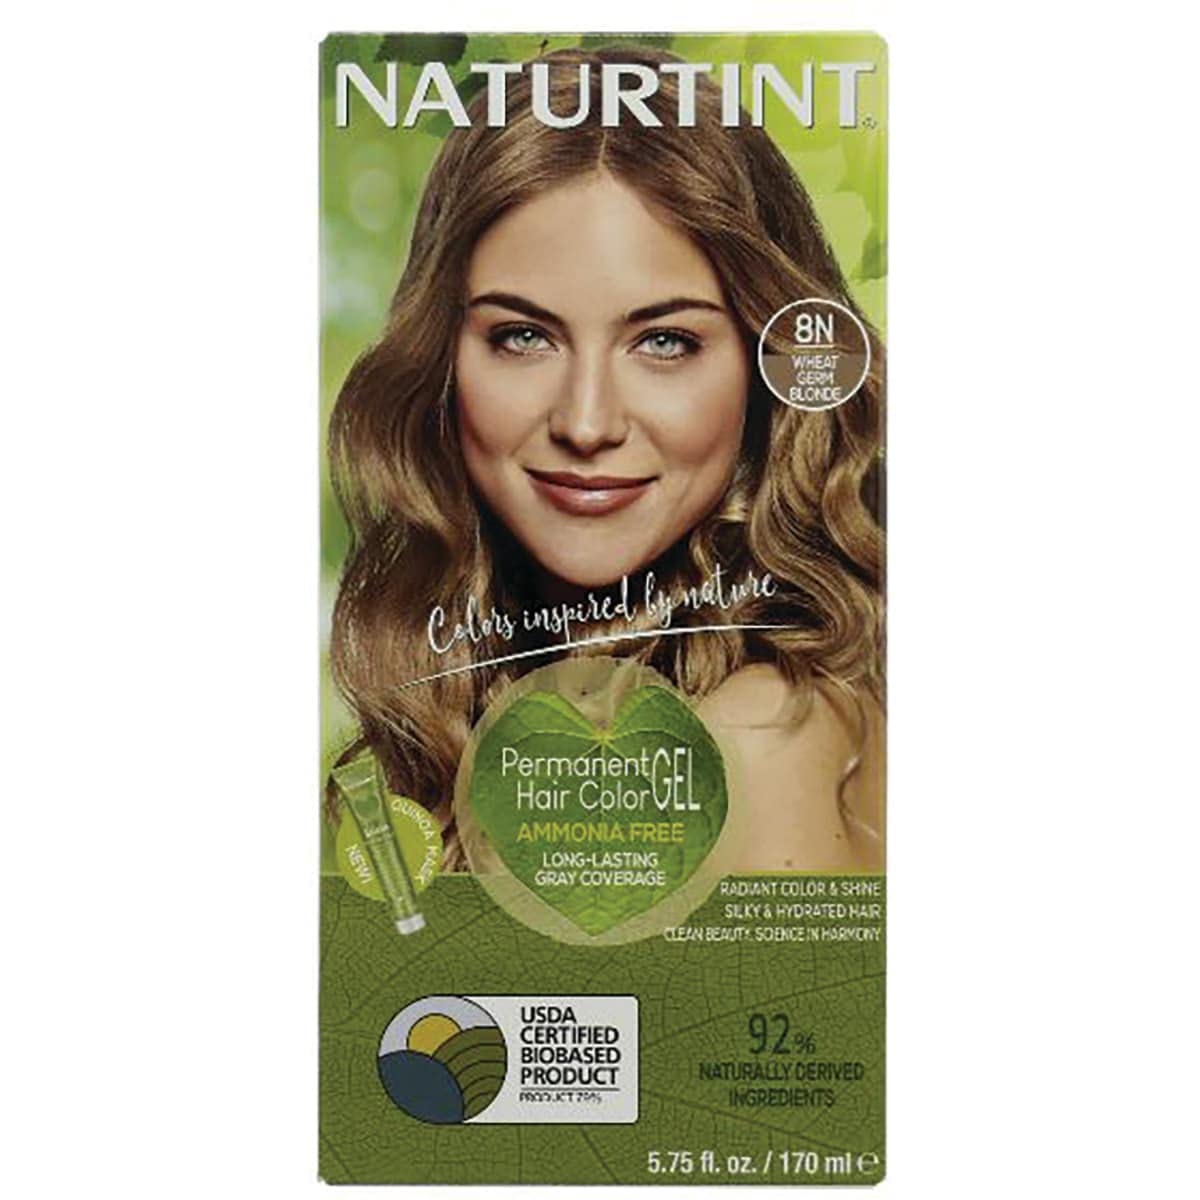 Naturtint Permanent Hair Color 8N Wheat Germ Blonde (Pack of 1)